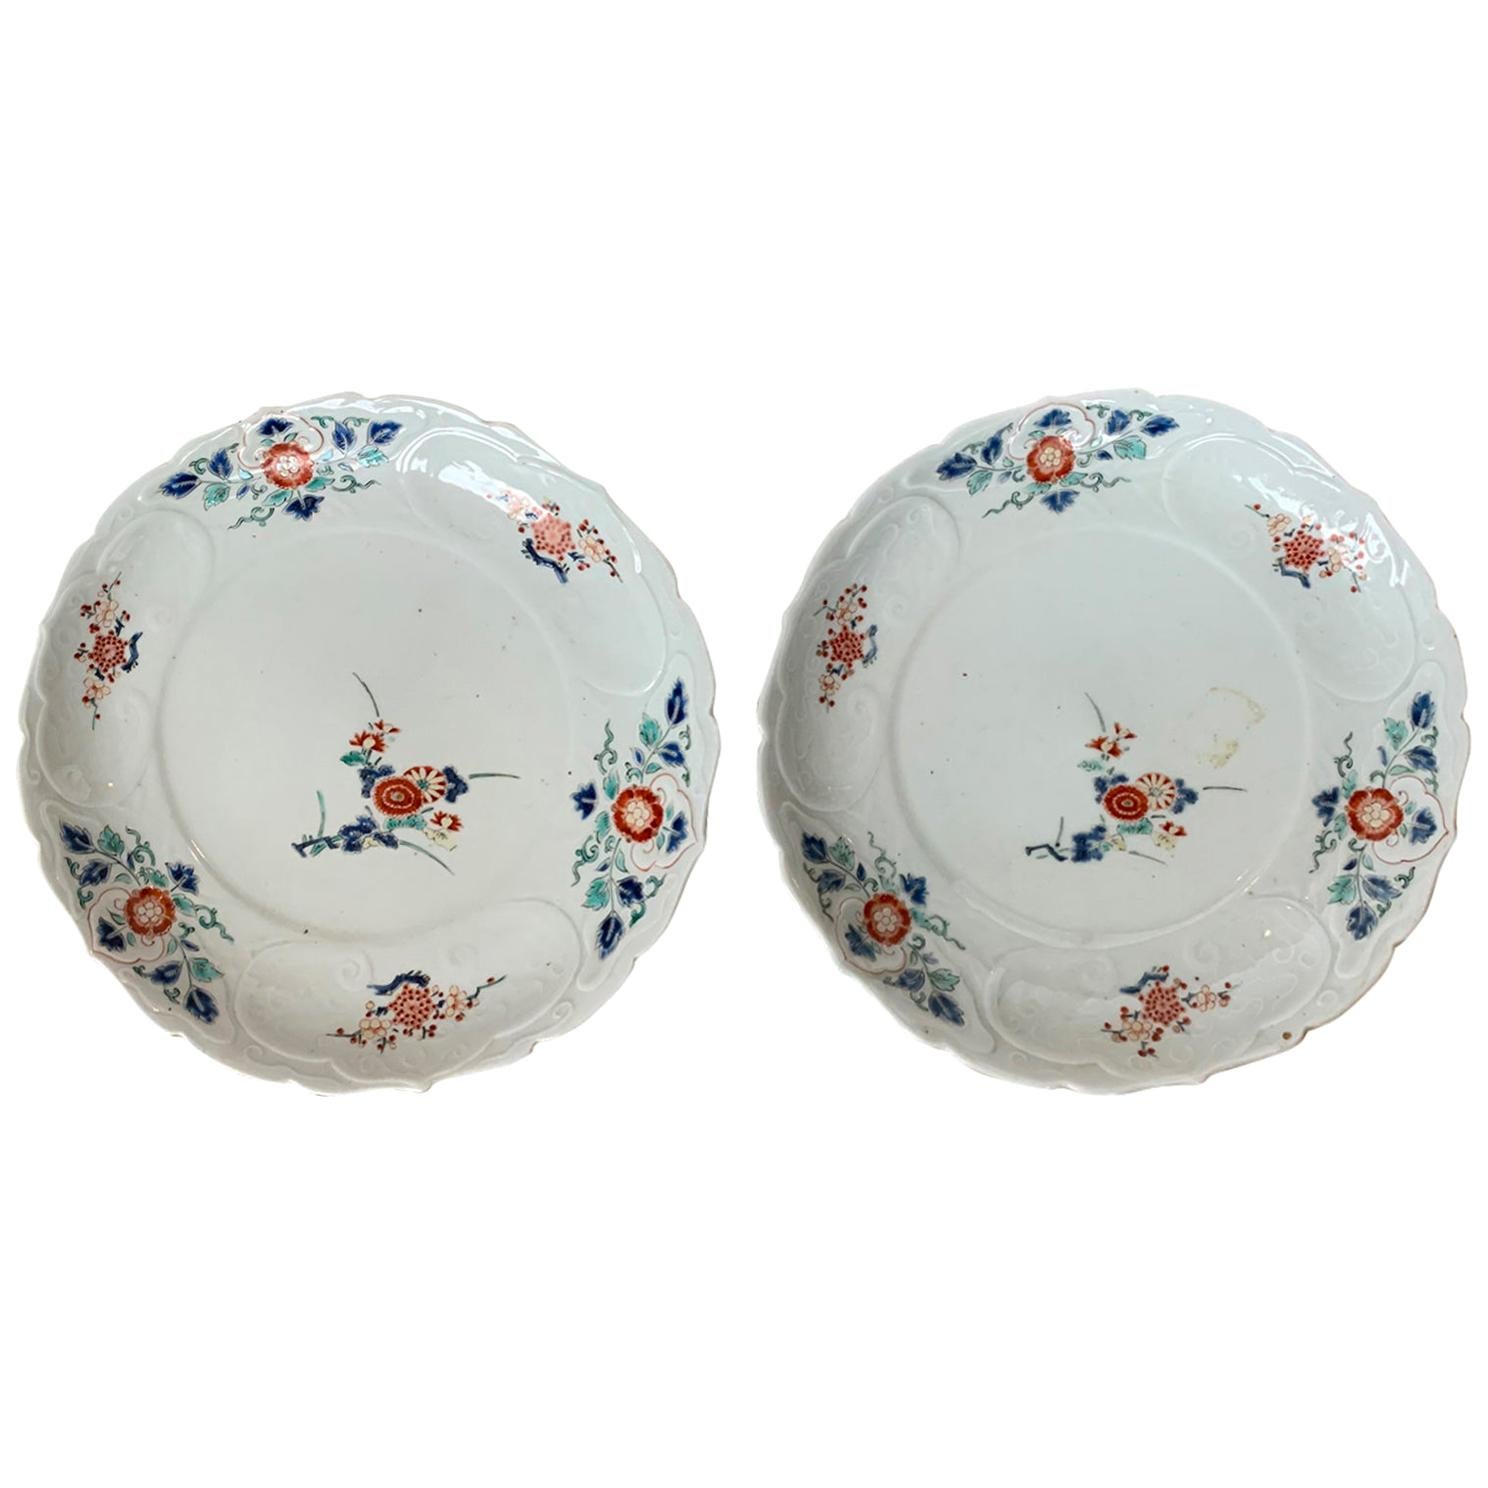 Pair of 19th Century Floral Round Porcelain Plates with Scalloped Edge, Unmarked For Sale